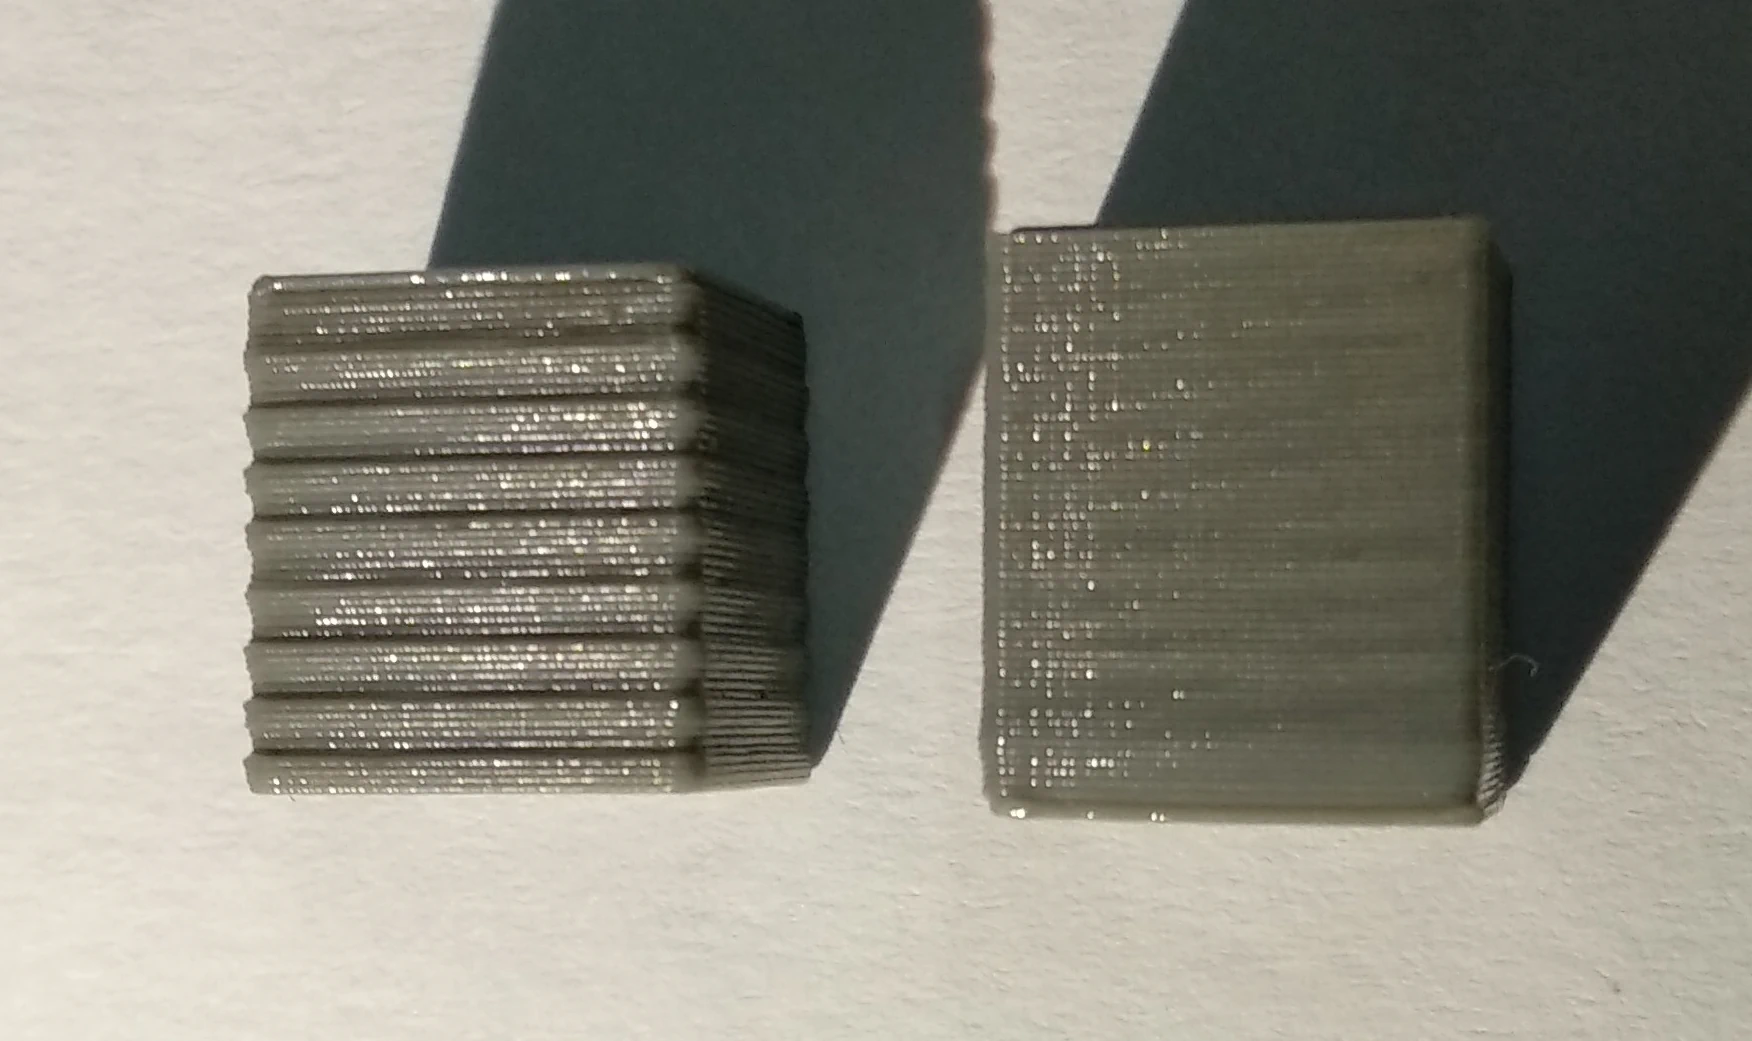 Print with and without waves on Z axis